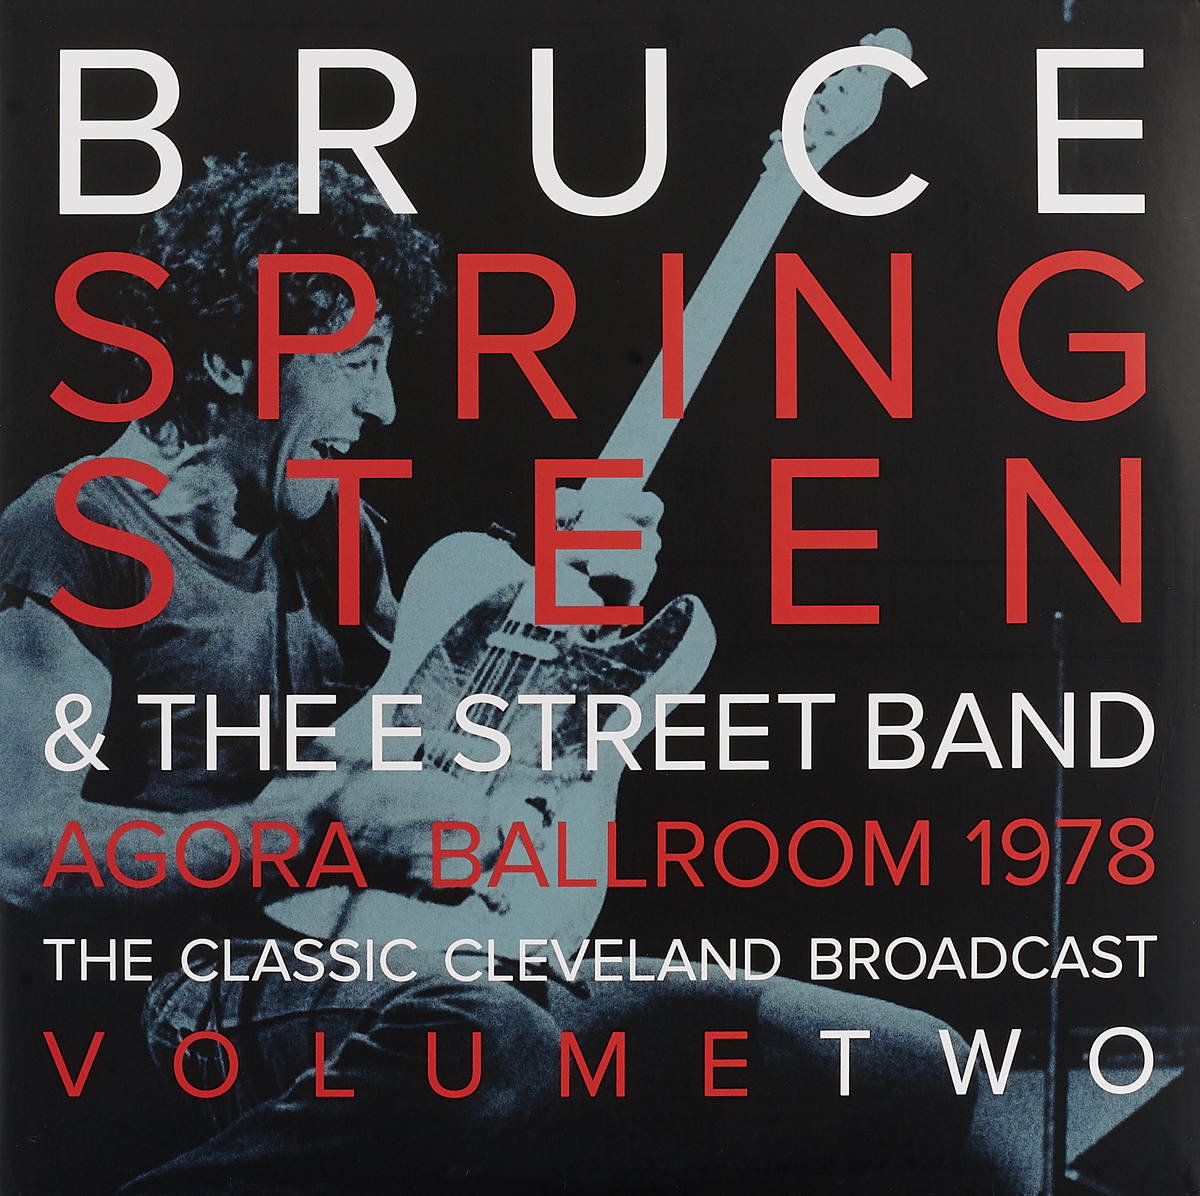 Bruce Springsteen & The E-Street Band. Agora Ballroom 1978 - The Classic Cleveland Broadcast Volume Two (2 LP)